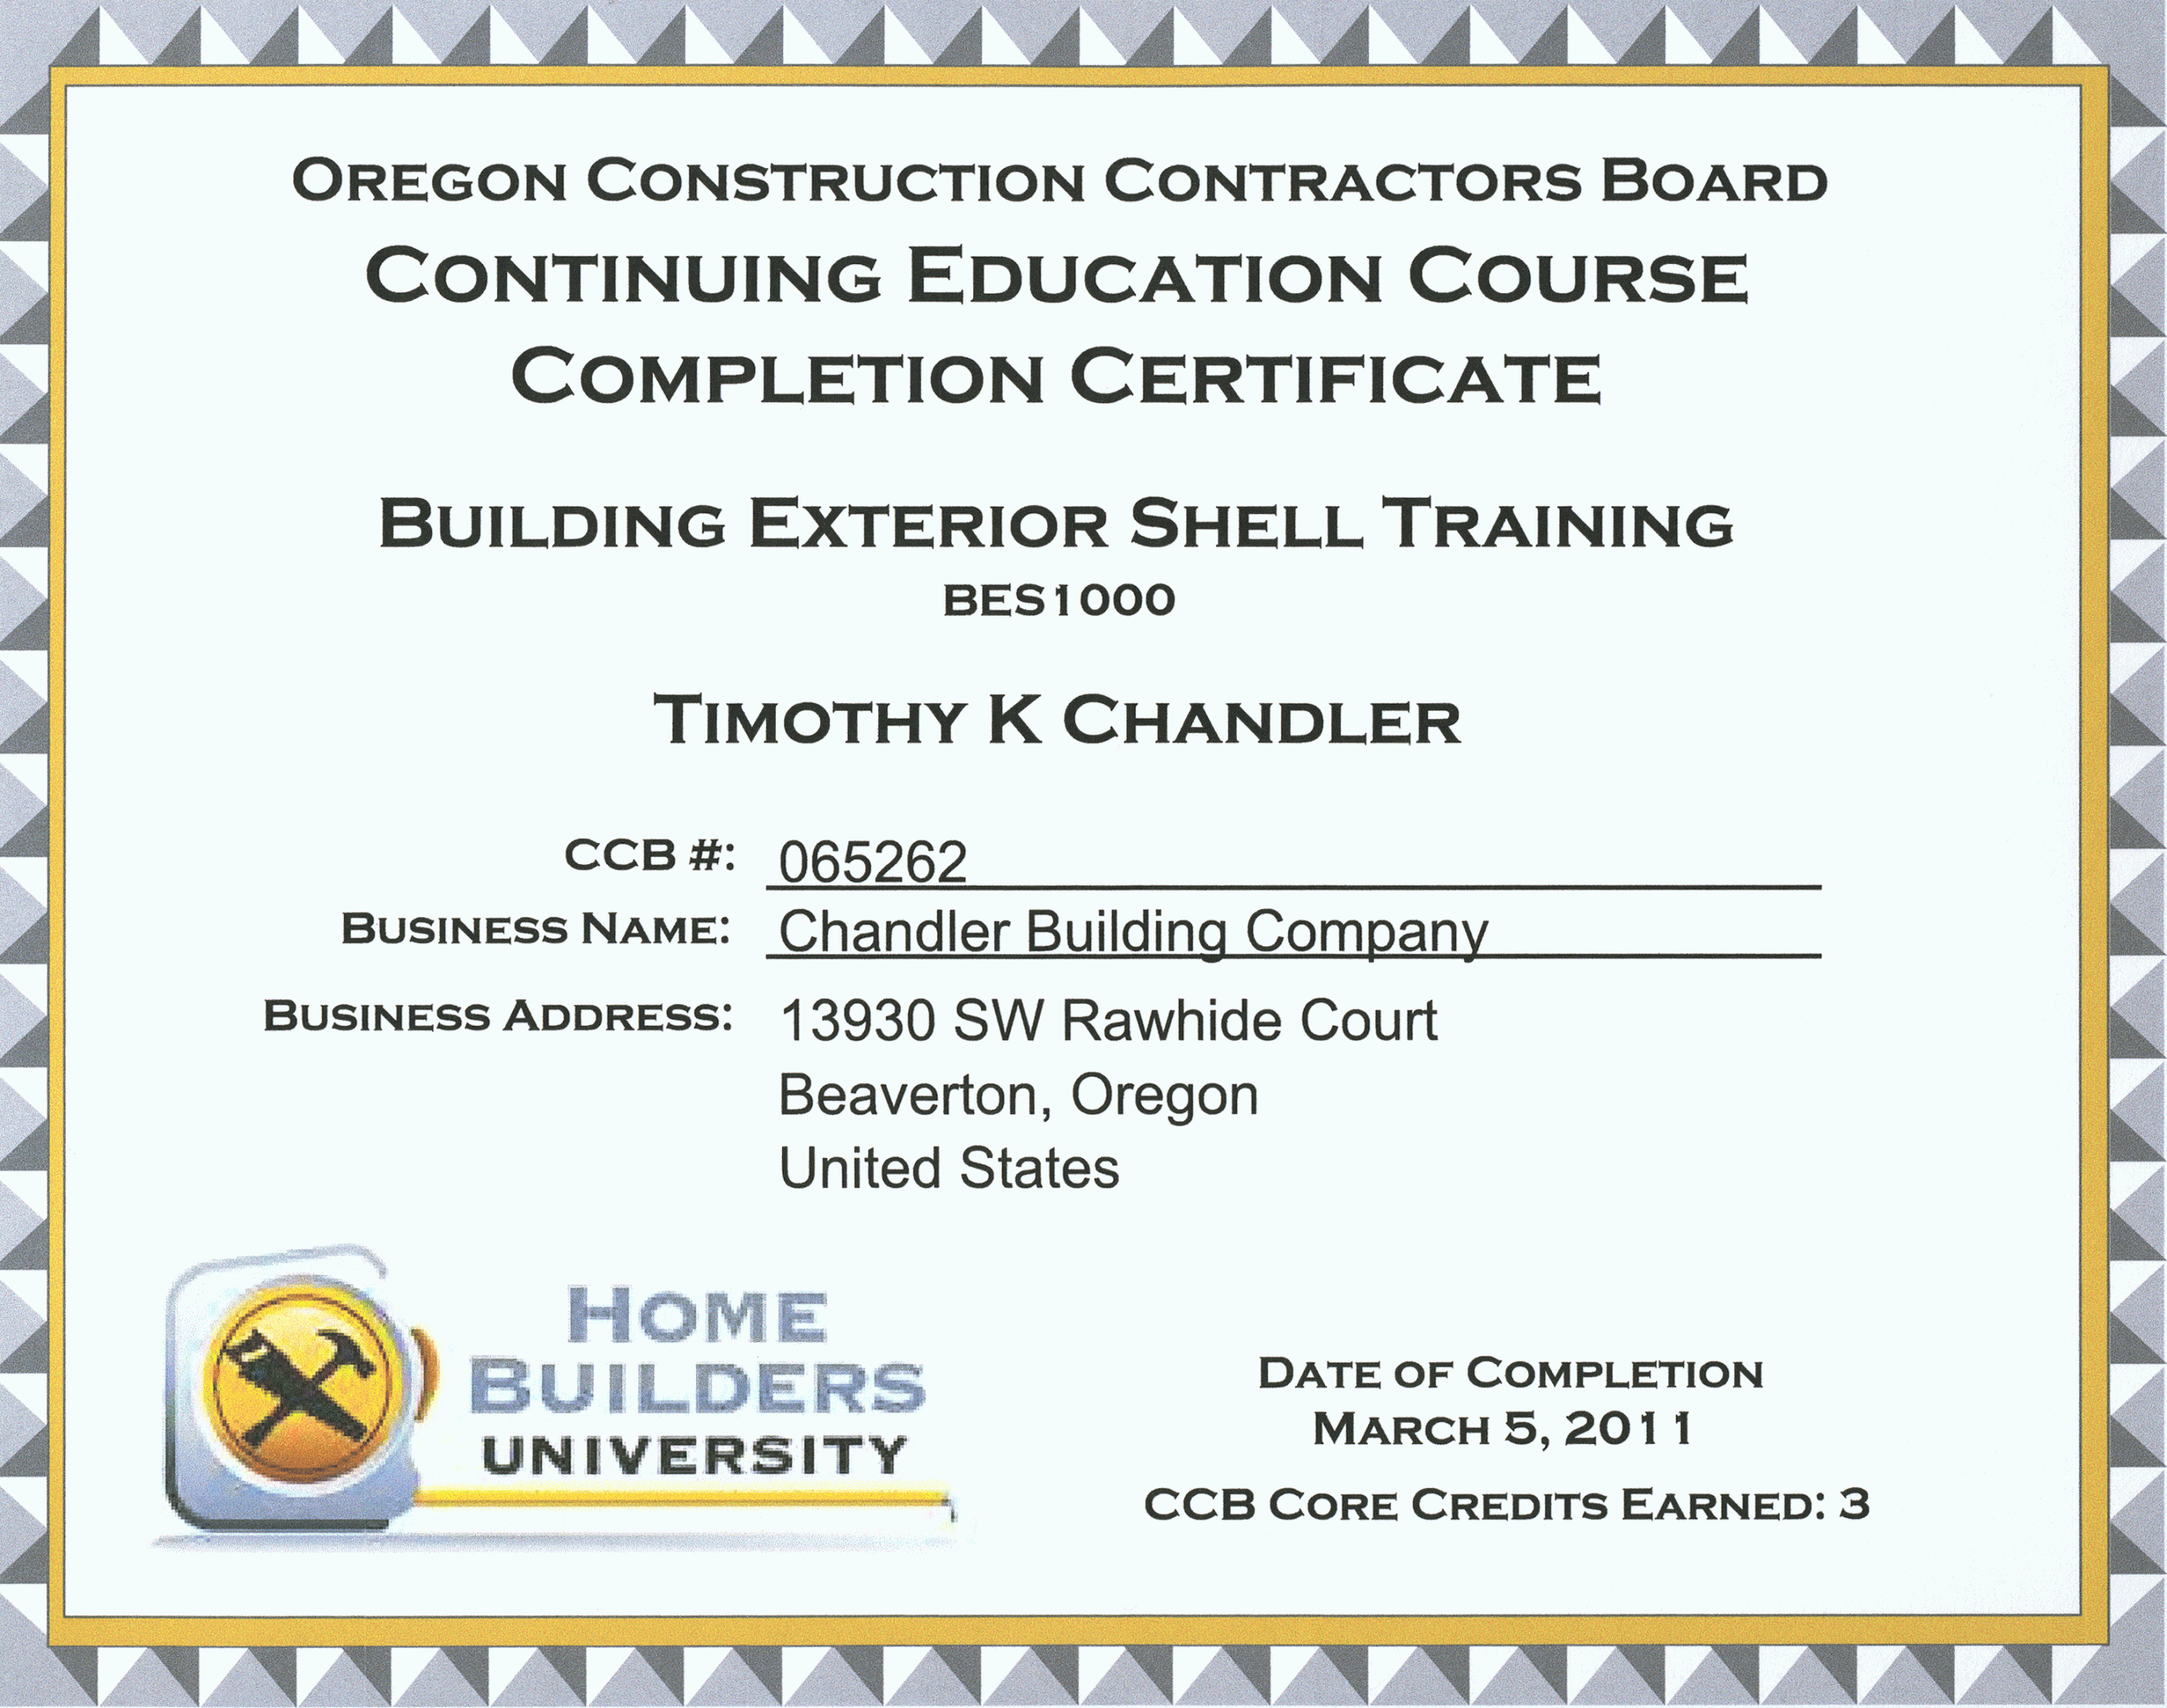 Continuing Education Certificate Template | Emetonlineblog In Continuing Education Certificate Template